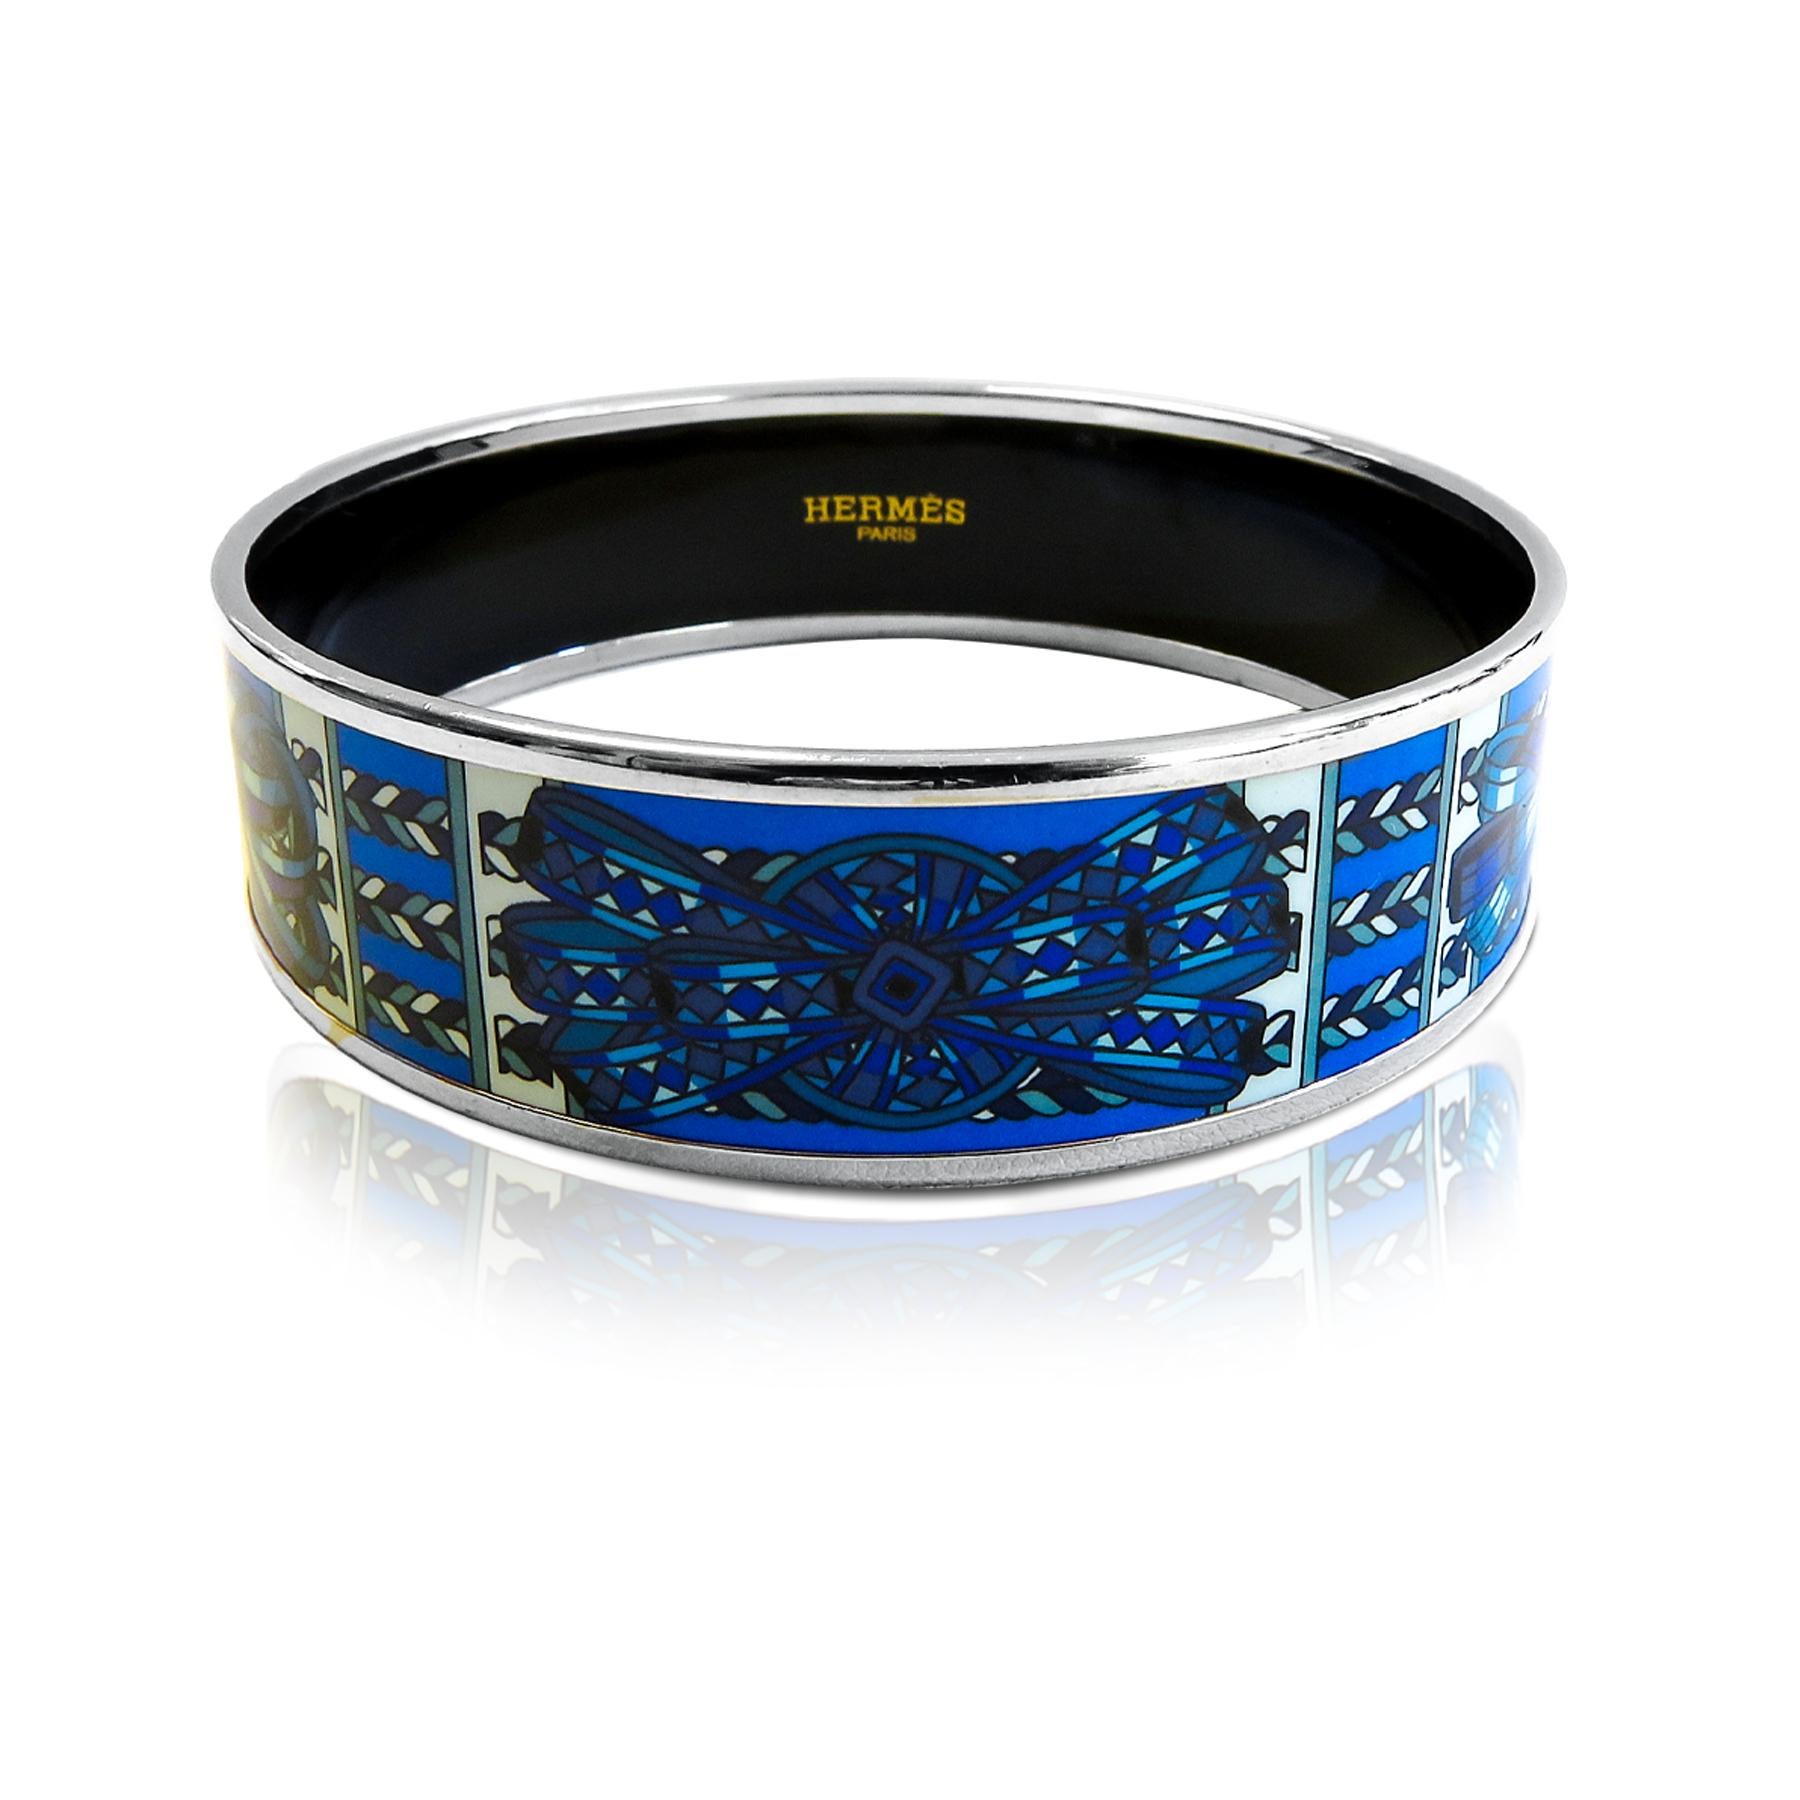 This Hermes bangle features platinum plated with a printed enamel. Carved in Austria, It weighs 38 grams, 20mm wide and has an inner diameter of 2.5 inches to give a comfortable fit in your wrist.
Condition: Excellent 